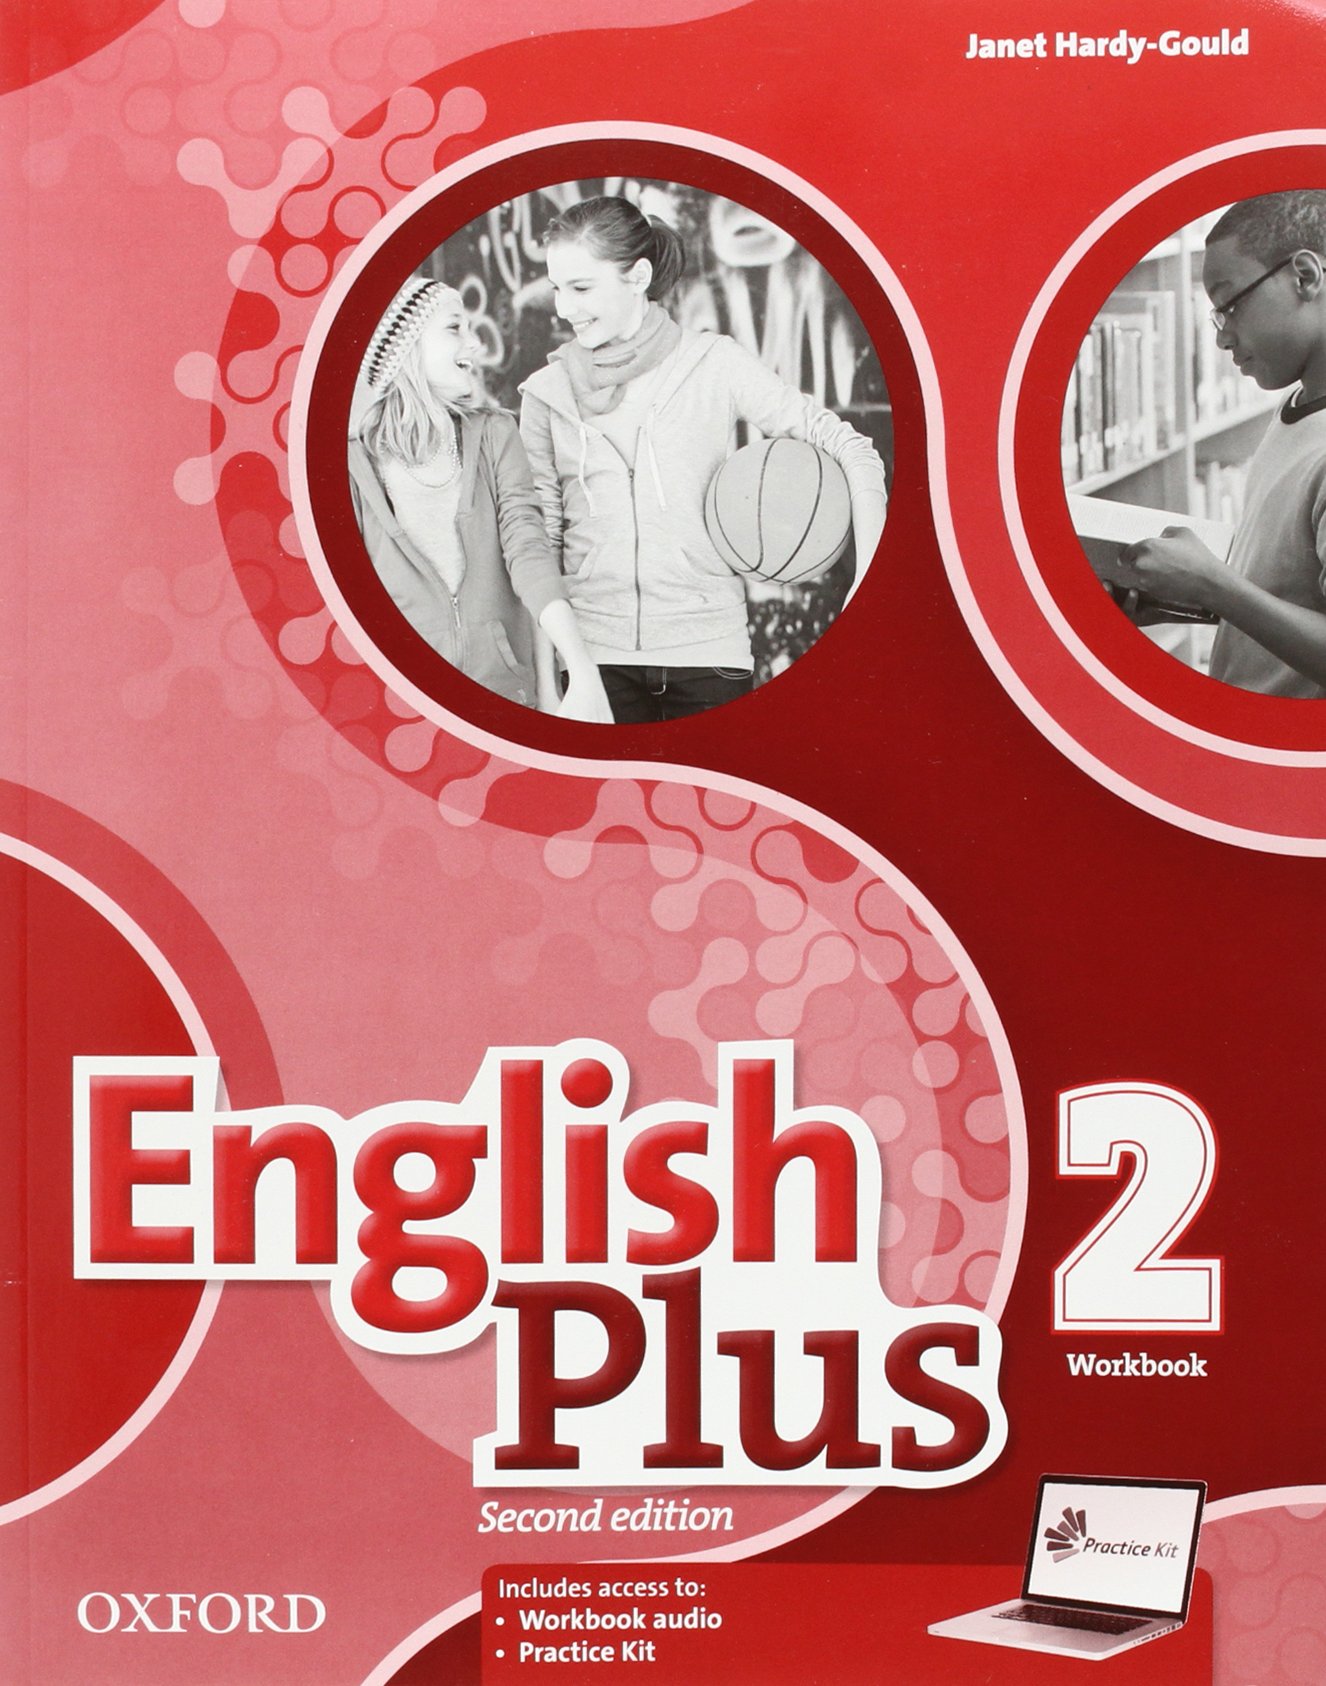 ENGLISH PLUS 2 2nd EDITION Workbook with Practice Kit Access 